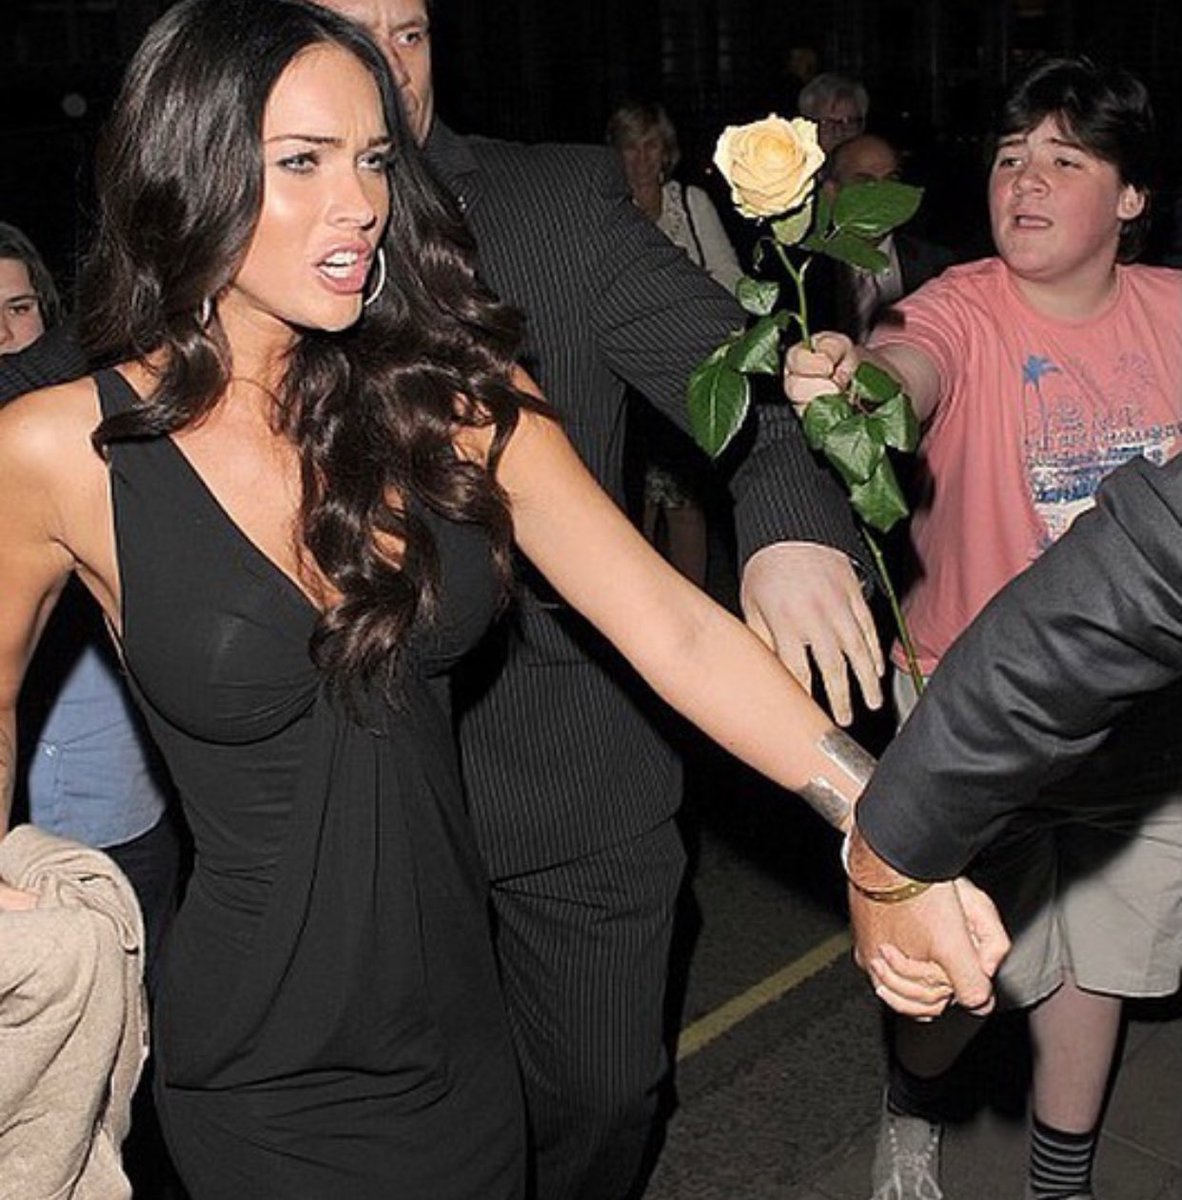 the time when megan fox accidentally ignored a young boy's rose and tried (but failed) to make up for it (1/8)